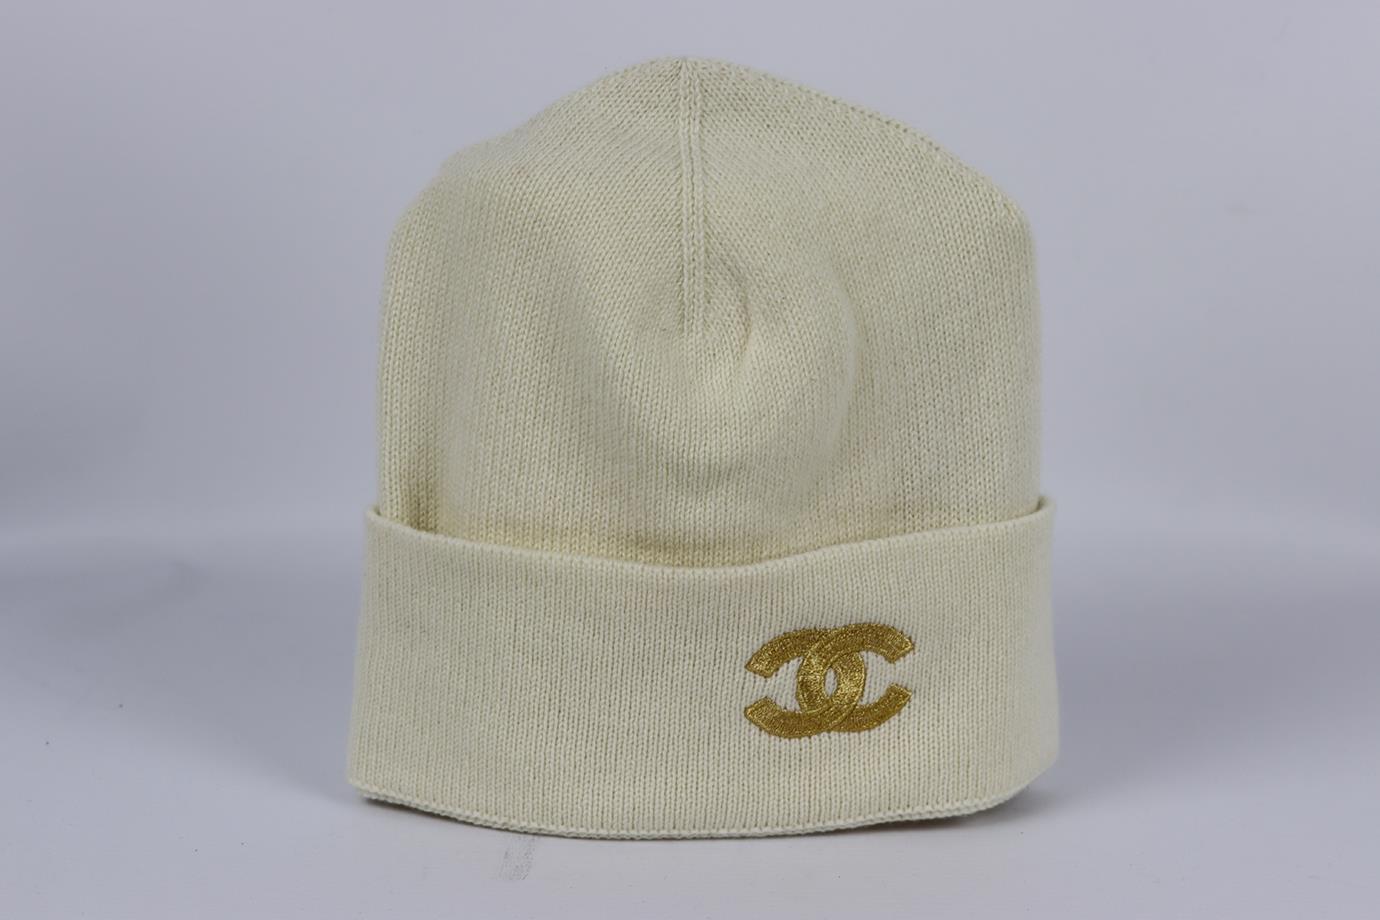 Chanel 2021 cc embroidered cashmere beanie. Cream and gold. Slips on. 100% Cashmere. Does not come with dustbag or box. Size: One Size. Circumference: 17.6 in. Very good condition - No sign of wear; see pictures.
